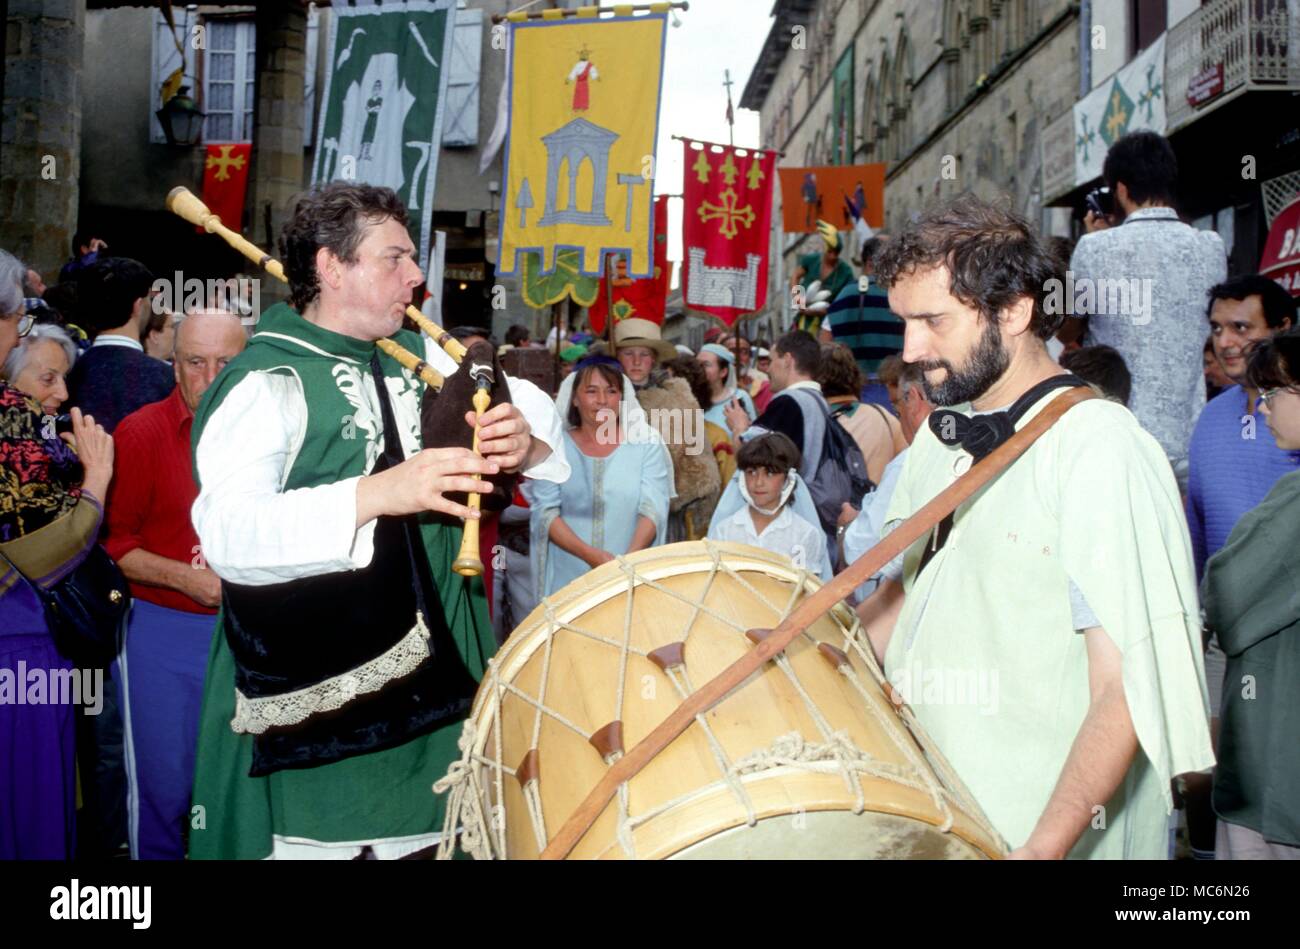 Festivals The festival of 'Le Grand Fauconnier', held annually at Cordes, SW France. Stock Photo